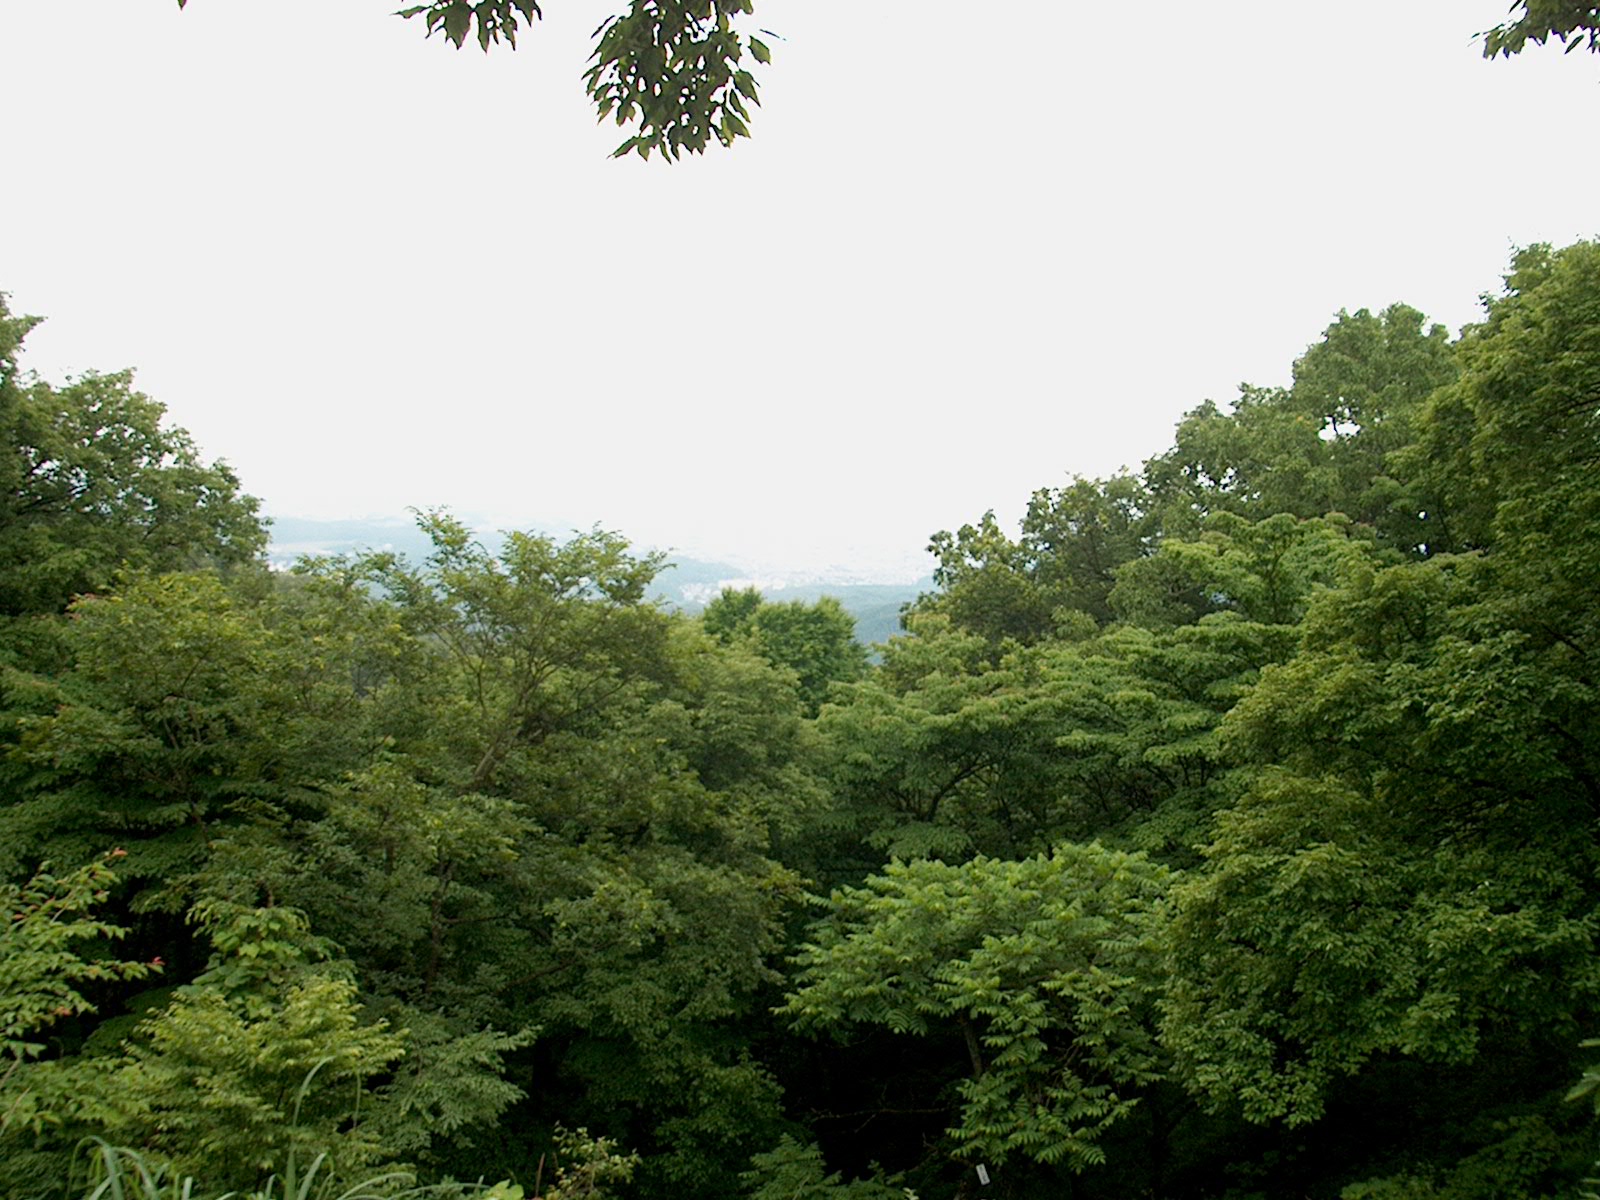 At the top, view through the trees